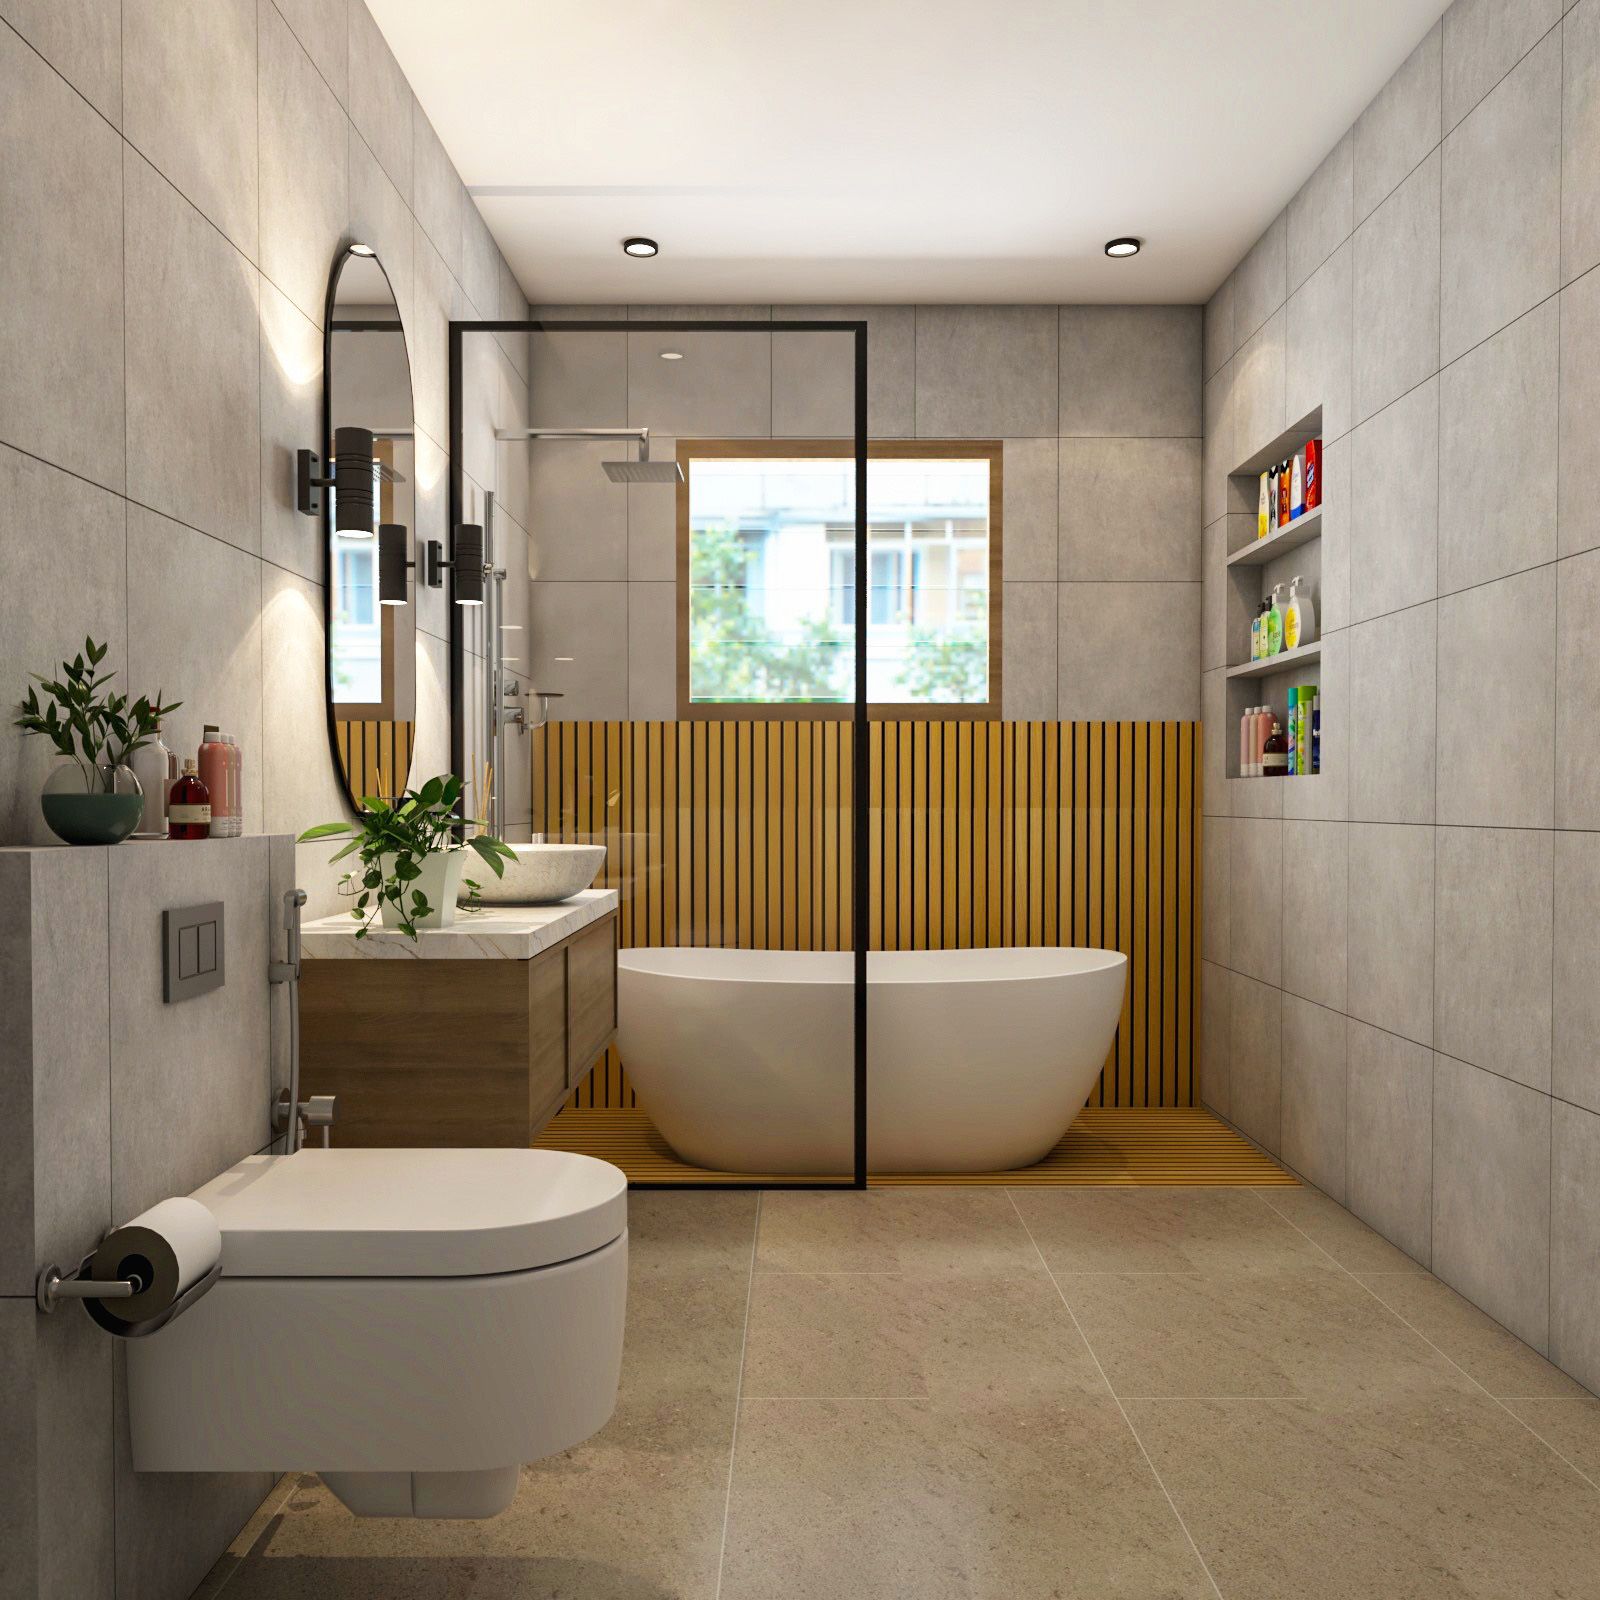 Scandinavian Grey Bathroom Design With Wooden Floor-To-Wall Panelling And White Bathtub